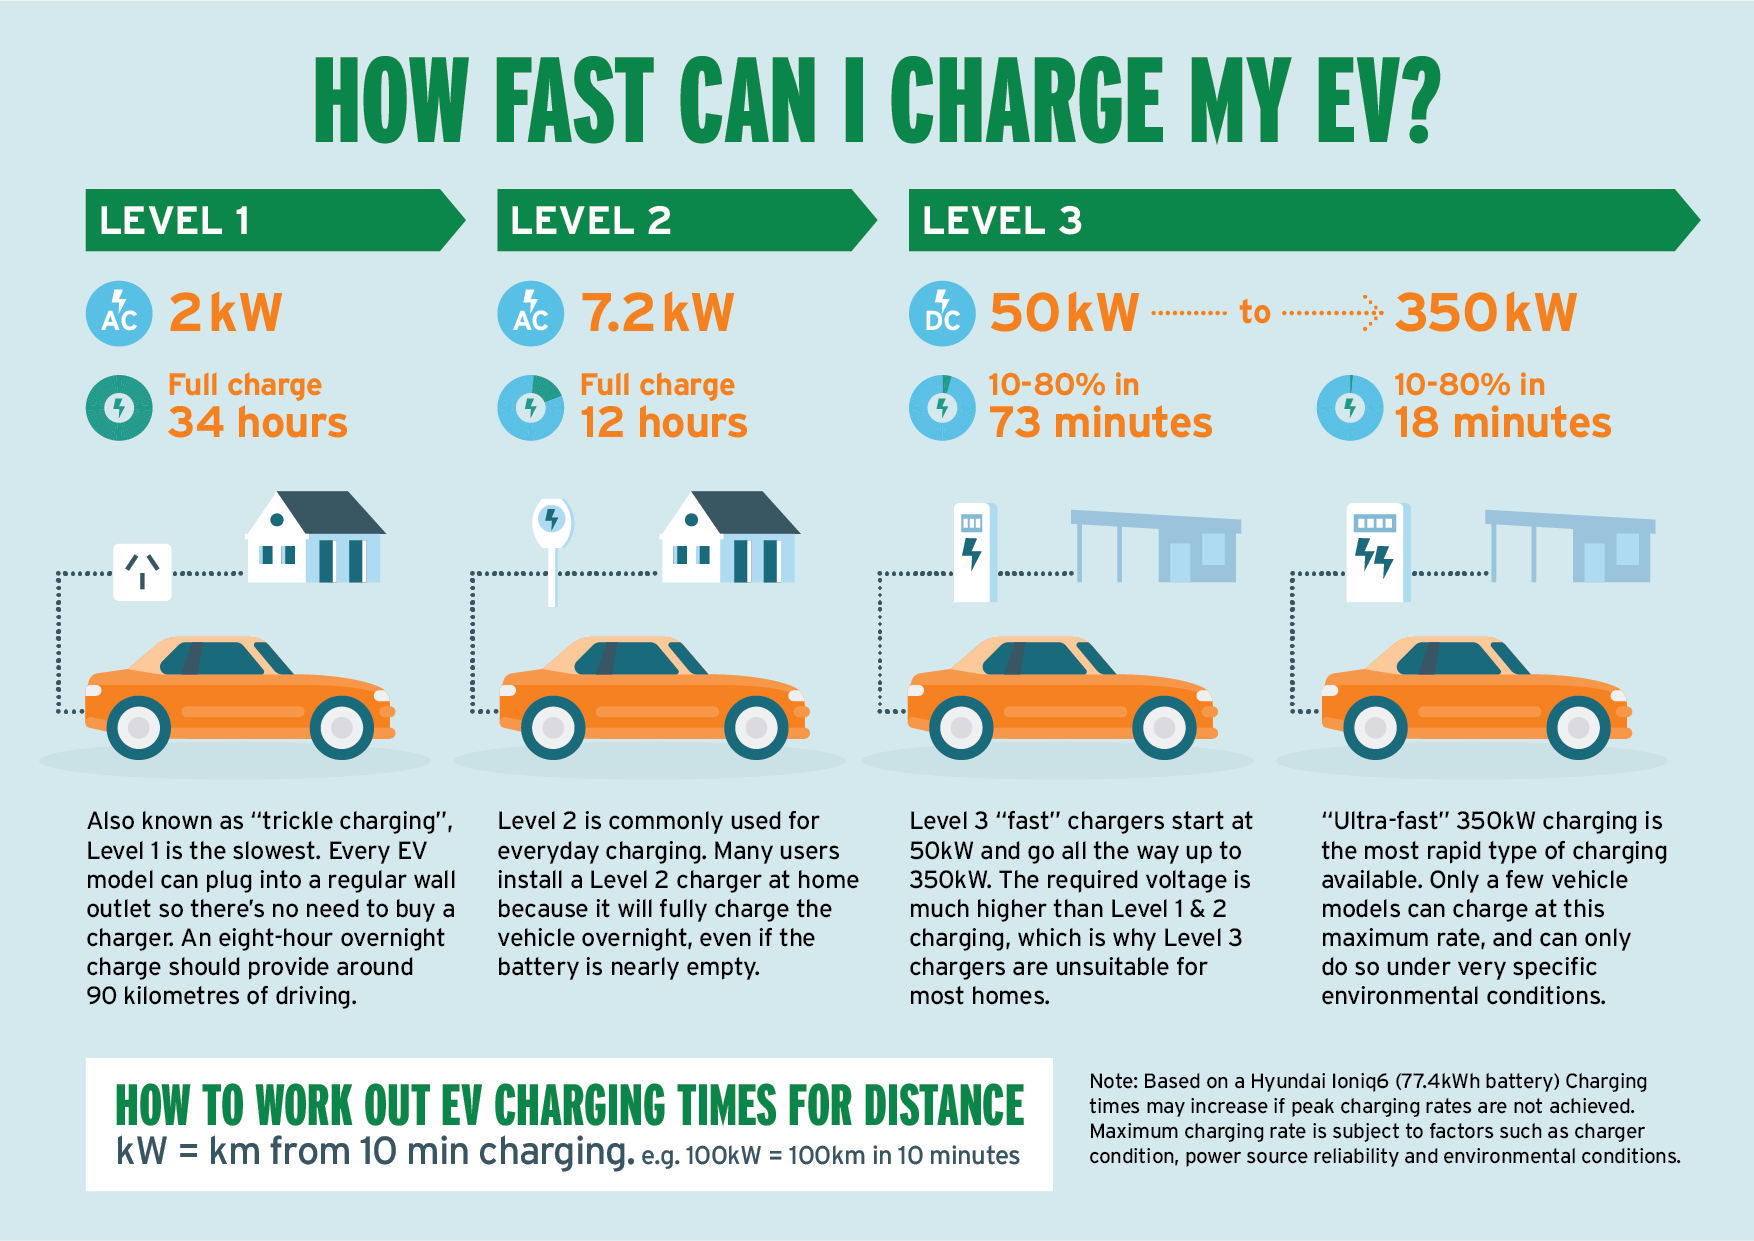 What is the max kW for EV charging?